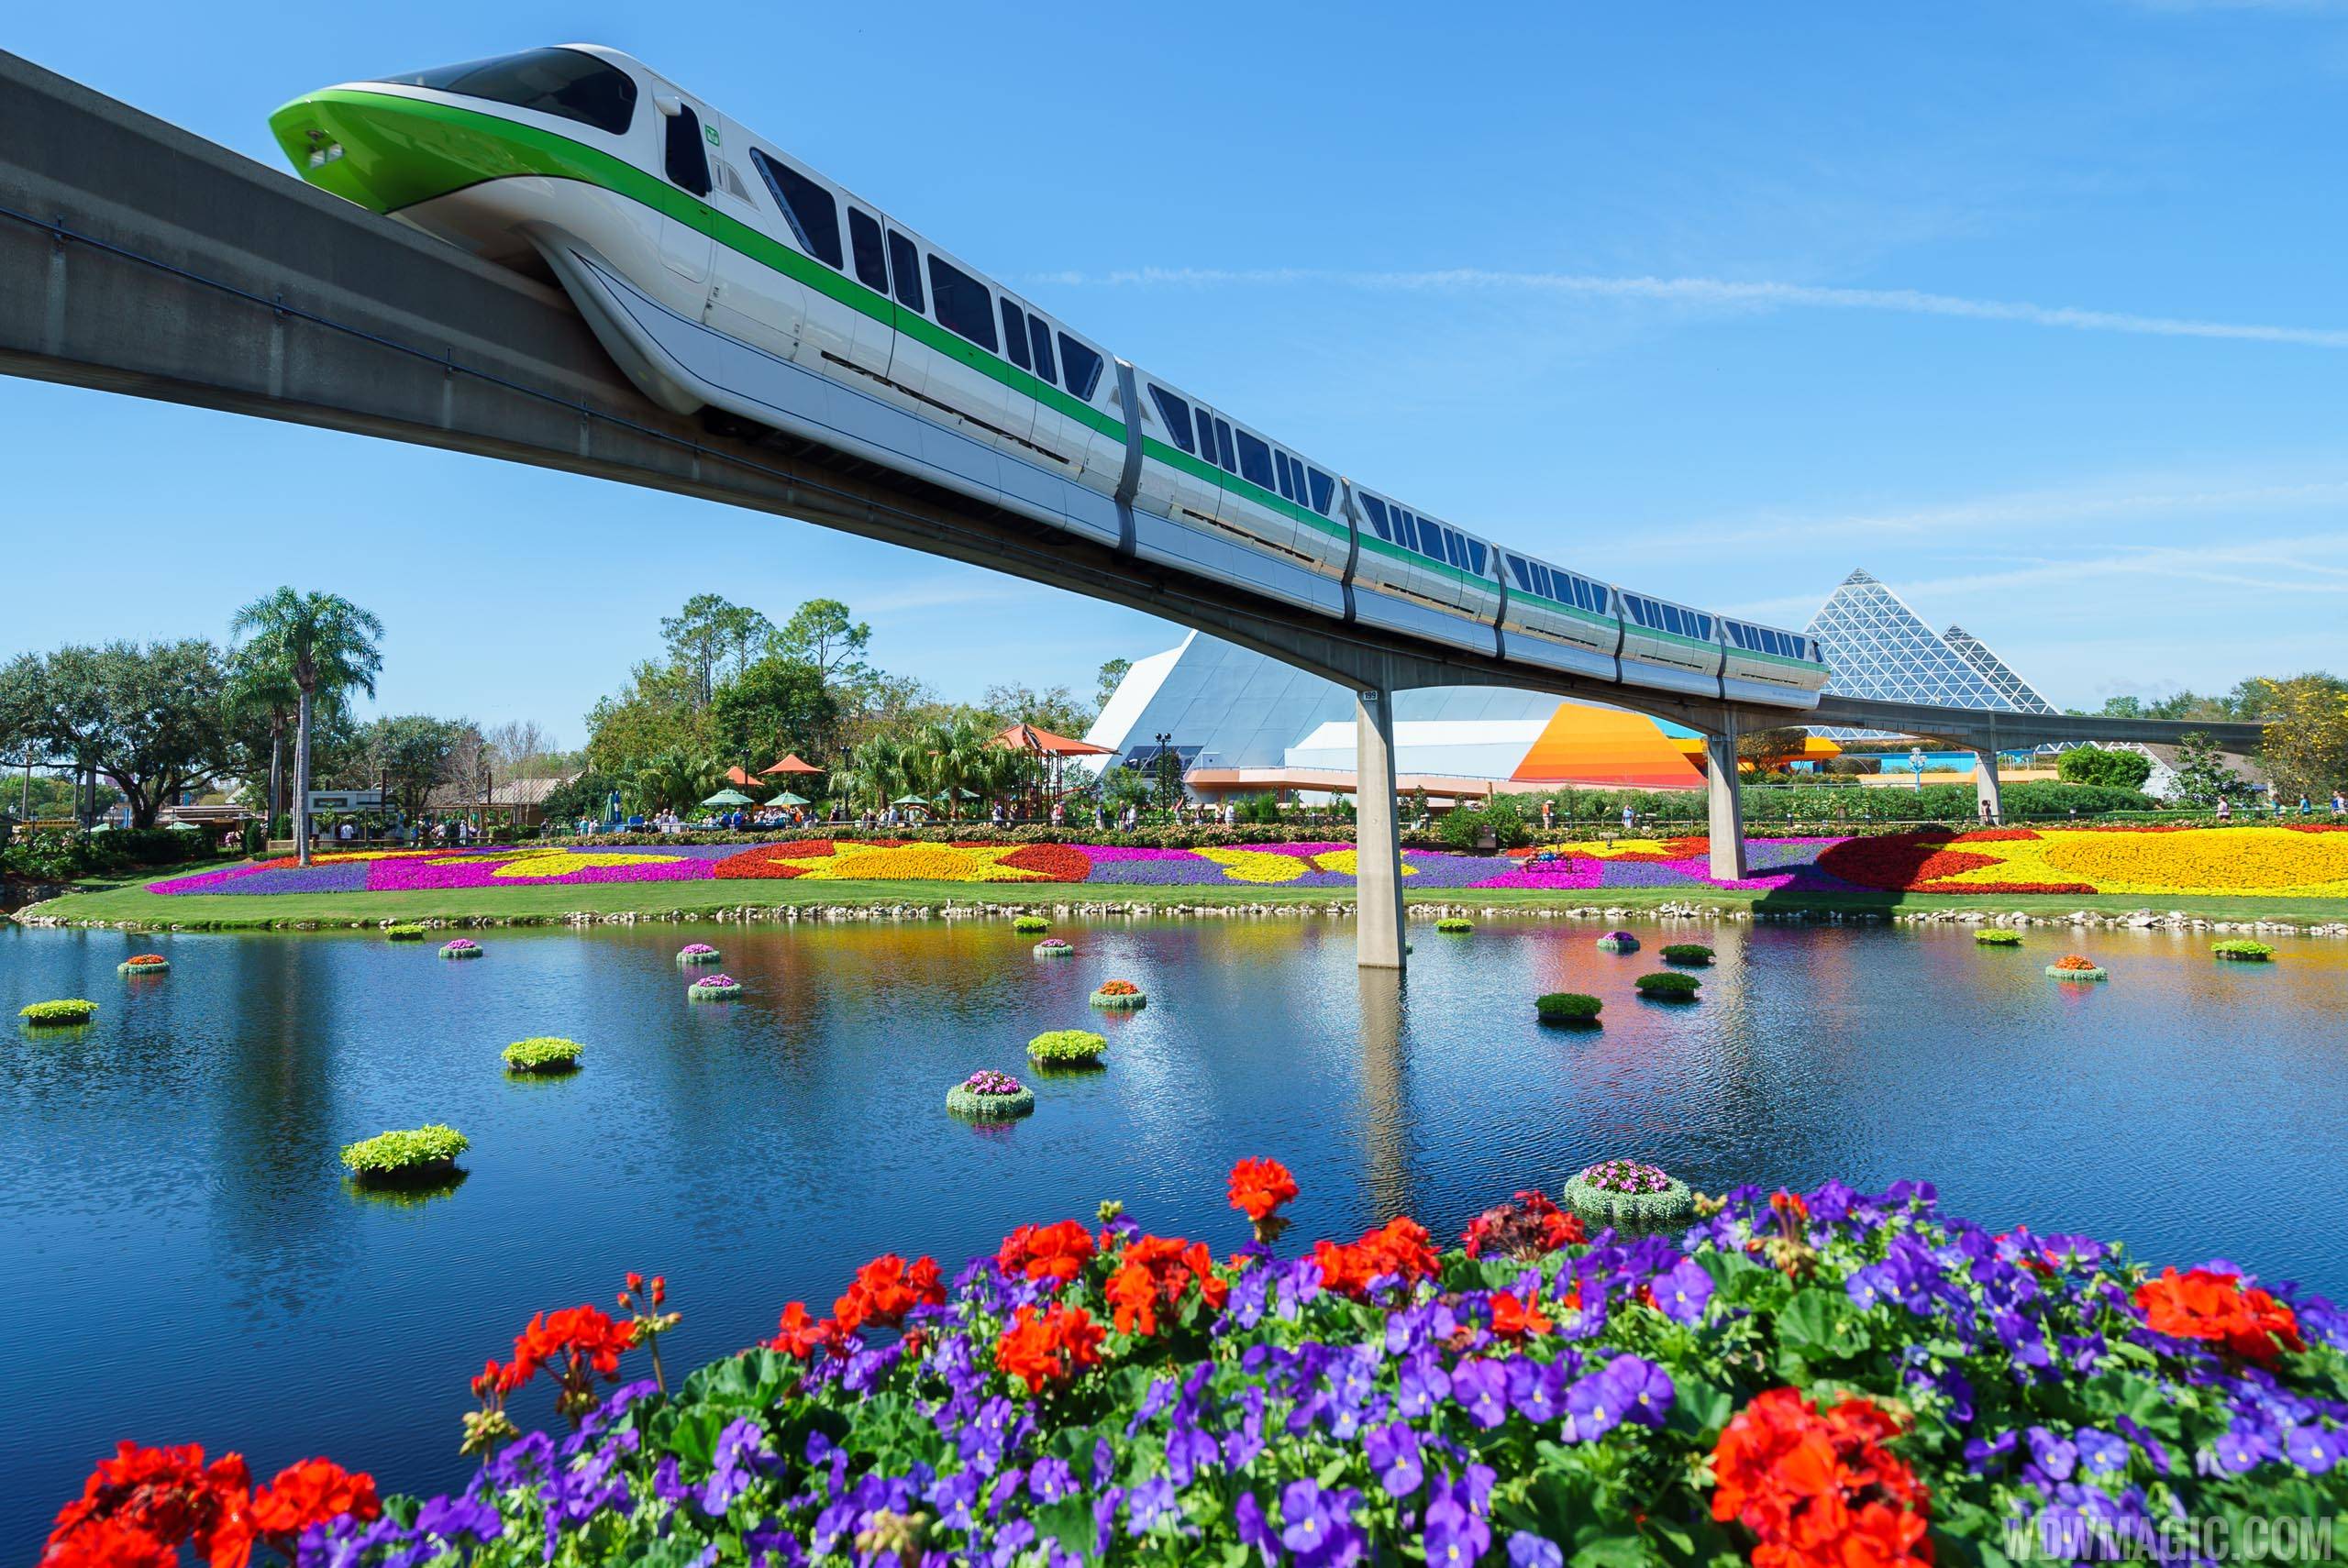 2017 Flower and Garden Festival - Monorail passes colorful gardens